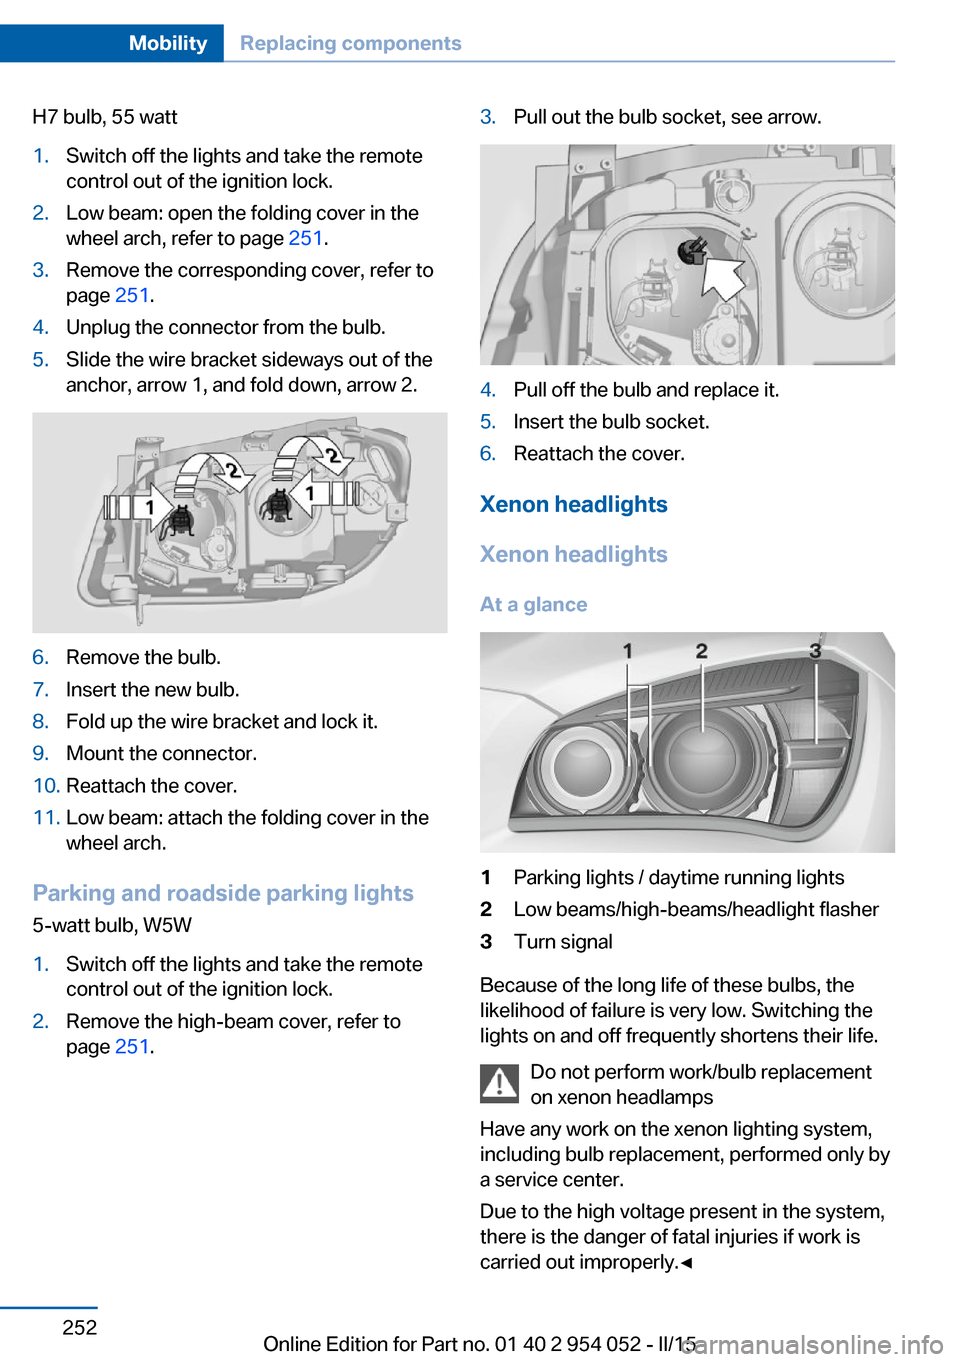 BMW X1 2015 E84 Owners Manual H7 bulb, 55 watt1.Switch off the lights and take the remote
control out of the ignition lock.2.Low beam: open the folding cover in the
wheel arch, refer to page  251.3.Remove the corresponding cover, 